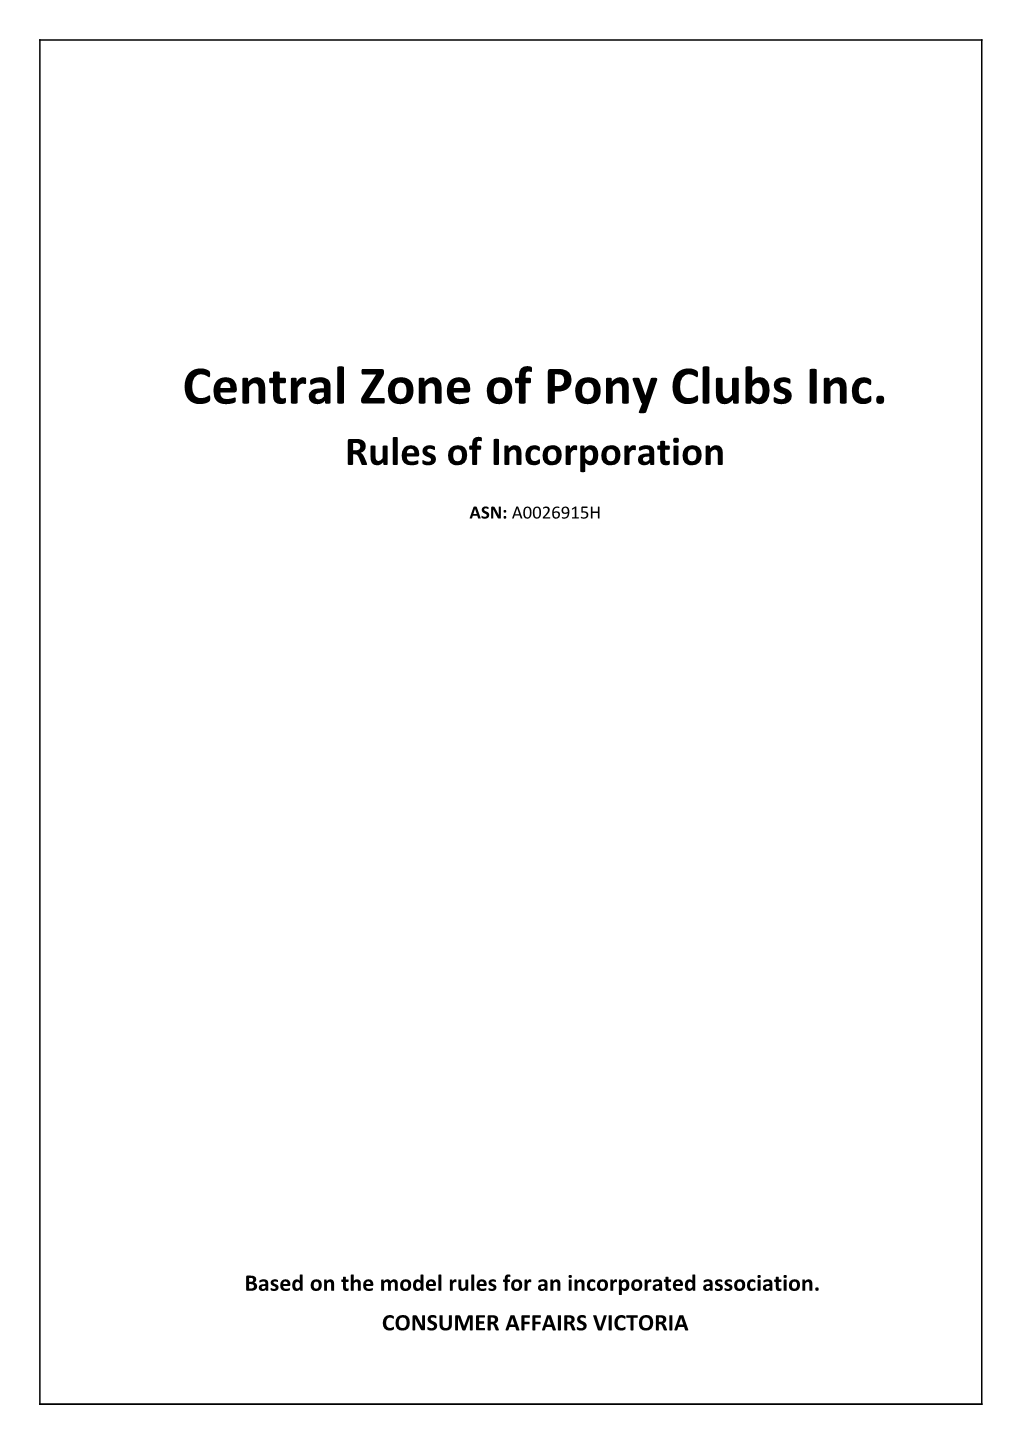 Rules of Incorporation Central Zone of Pony Clubsinc